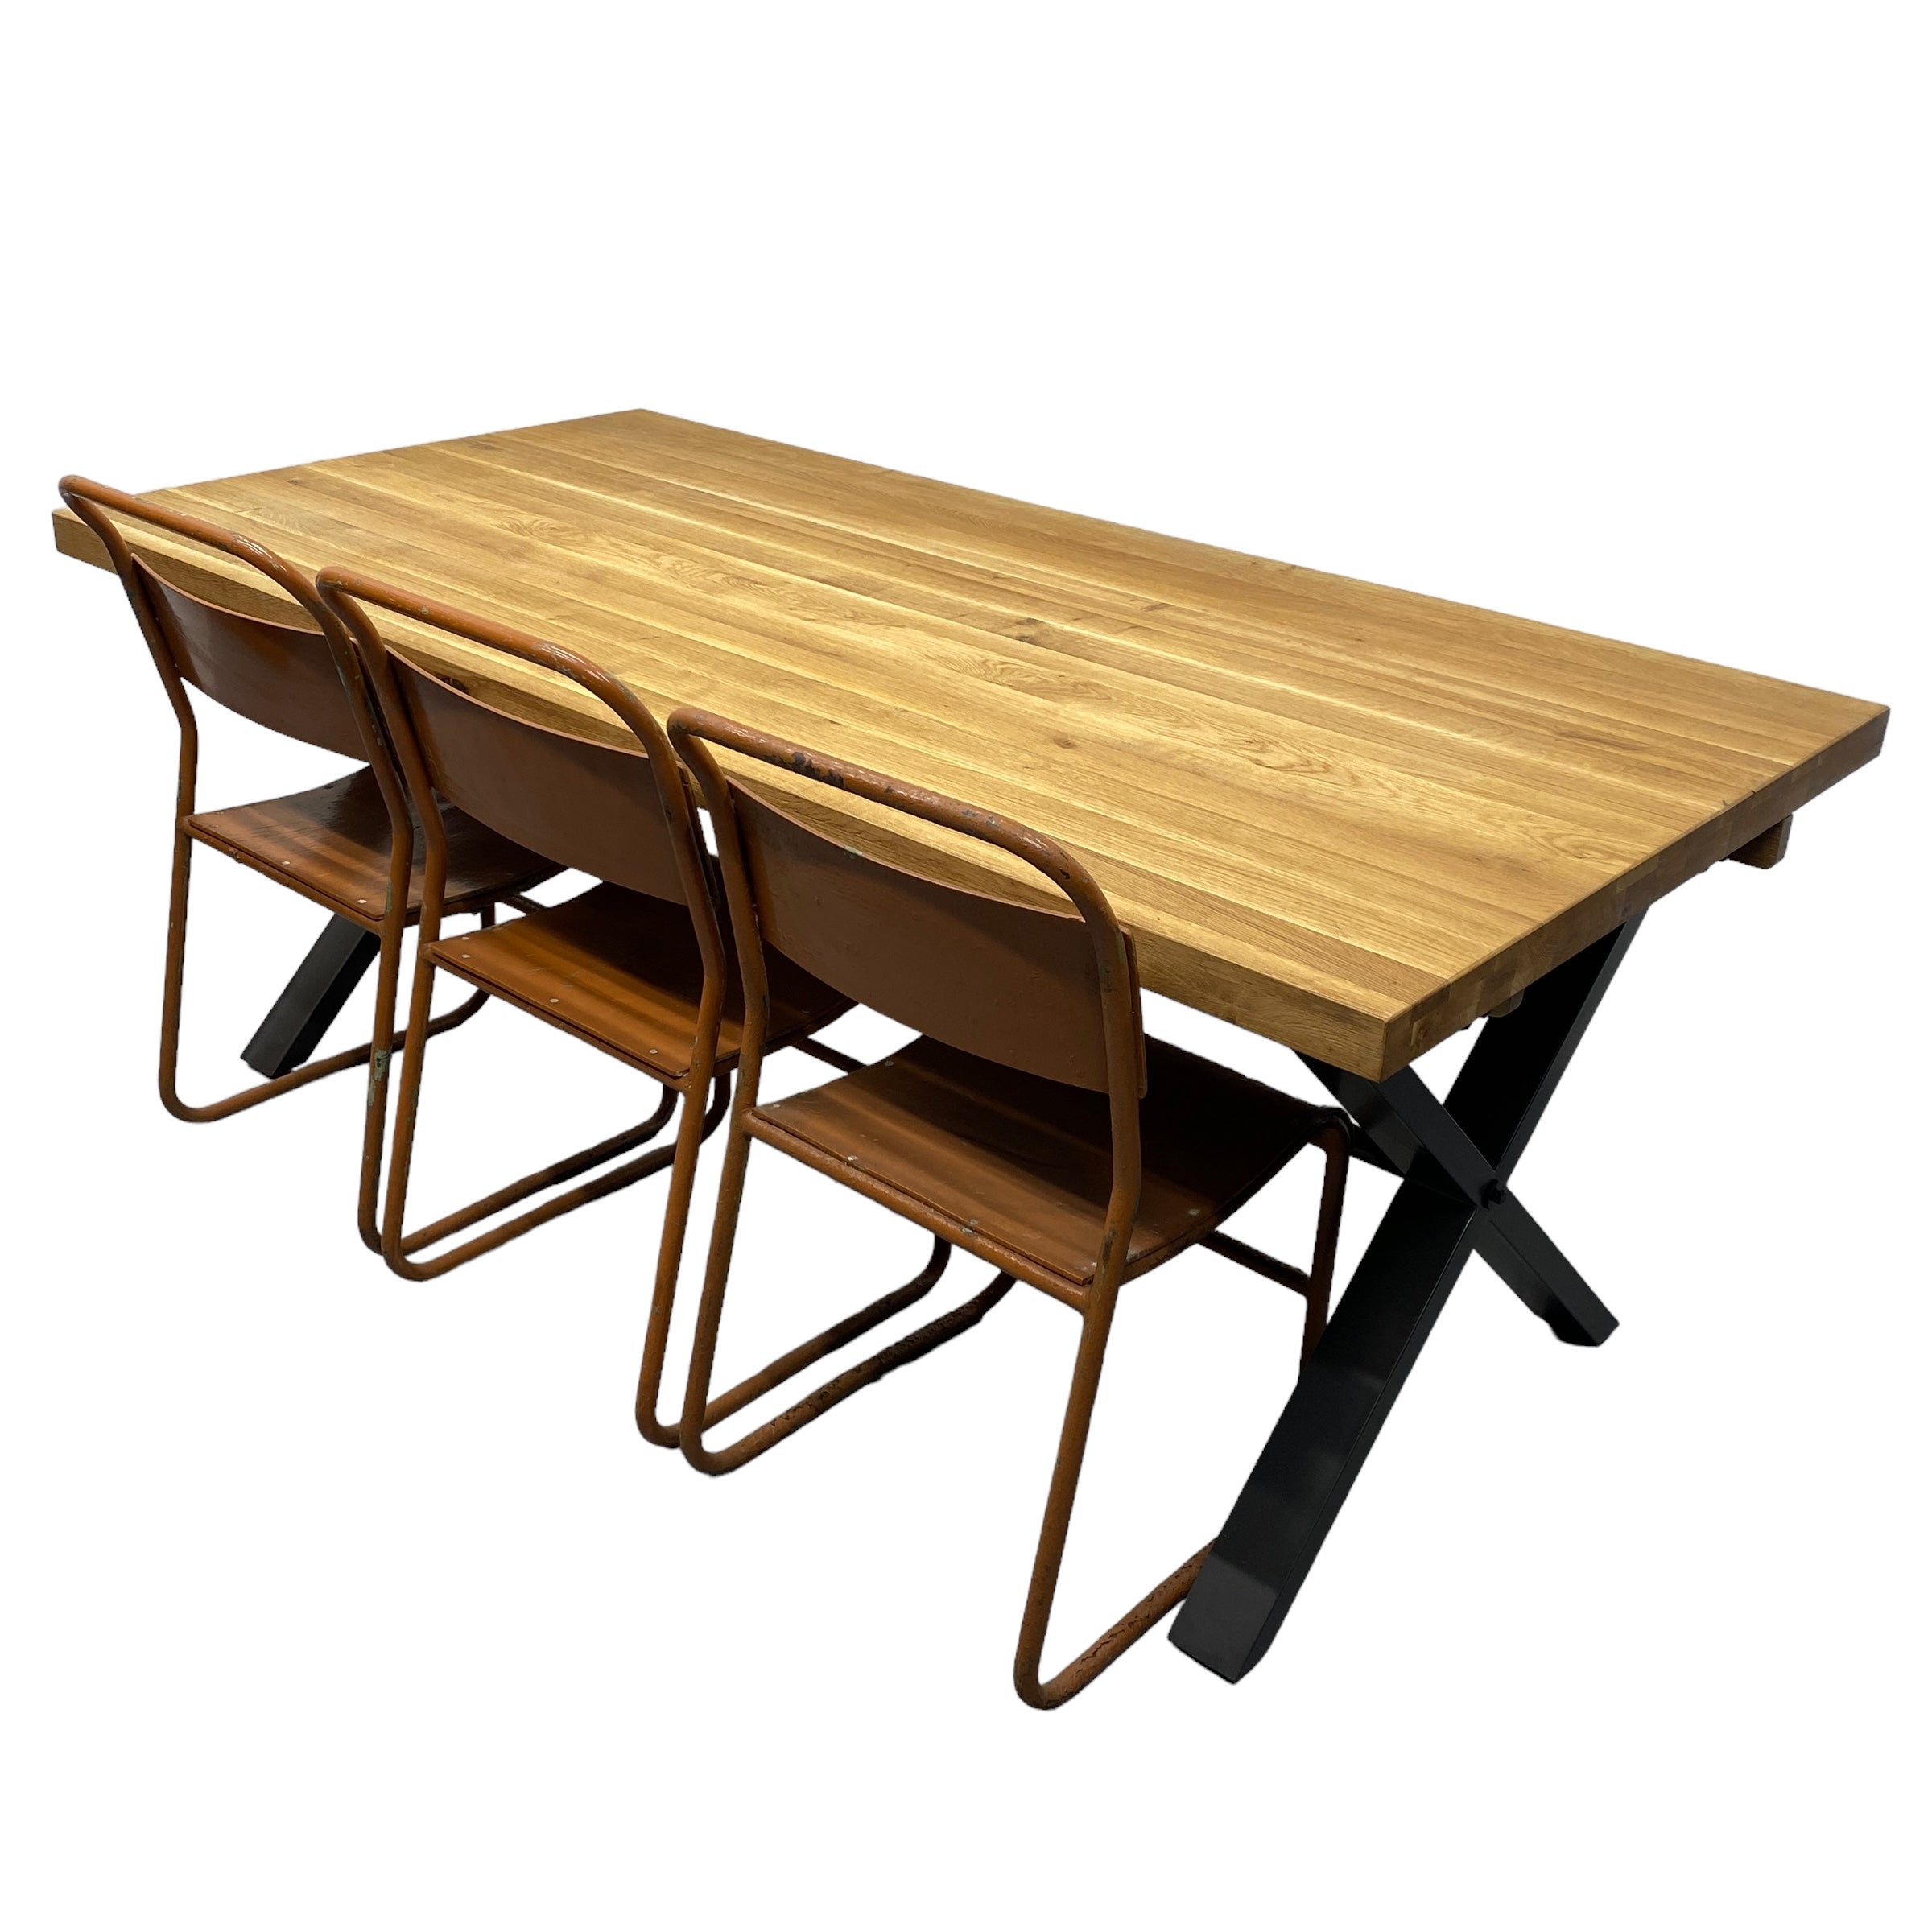 Oak Dining Table Industrial Style And Chairs